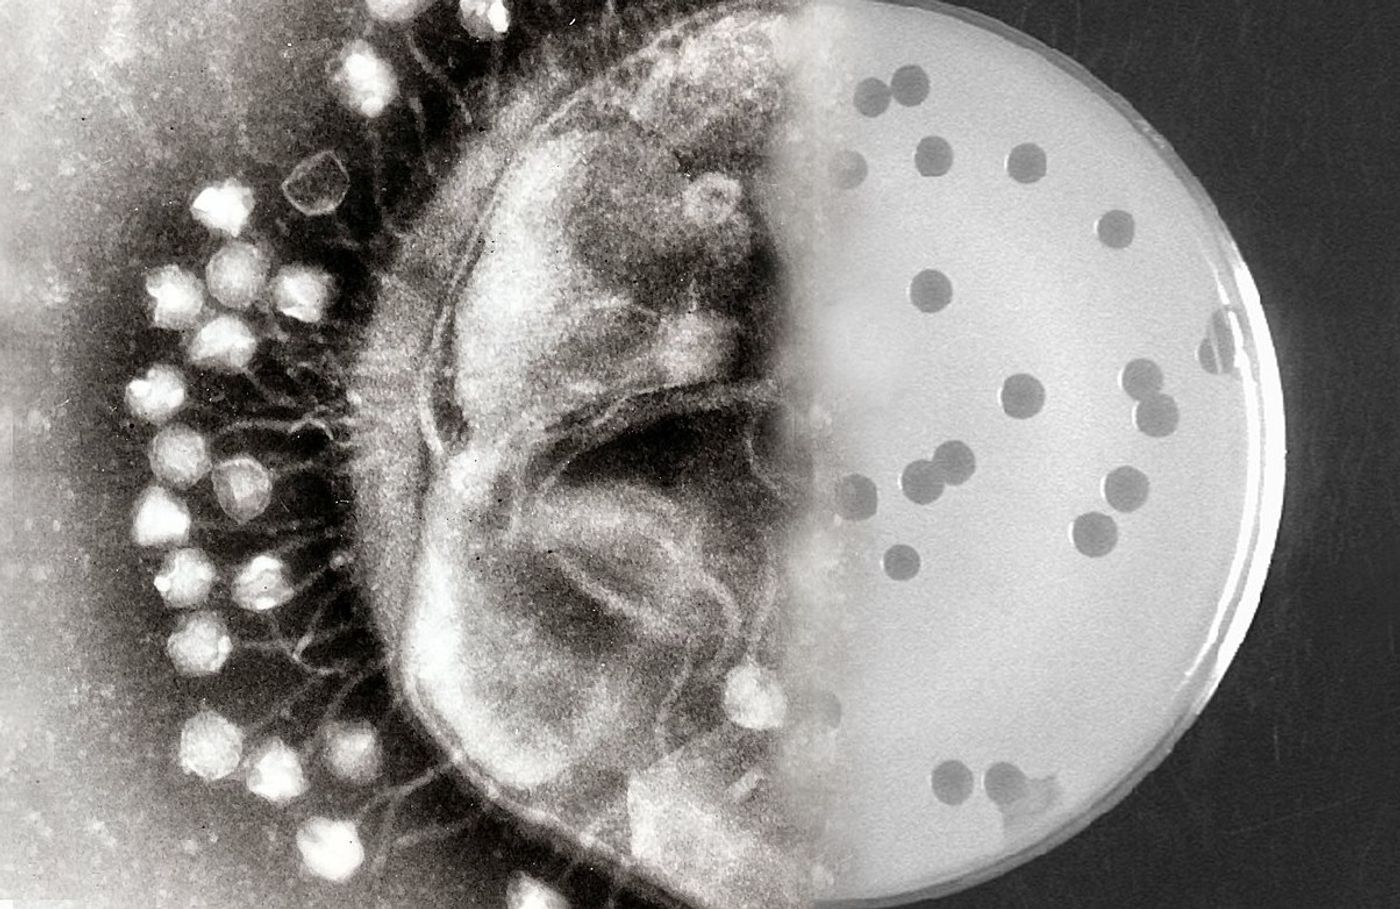 The right half of the image shows a petri plate with a lawn of bacterial cells and clear spots created by phage infection. On the left is an electron micrograph of a bacterial cell with multiple phage particles attached to its cell membrane. 